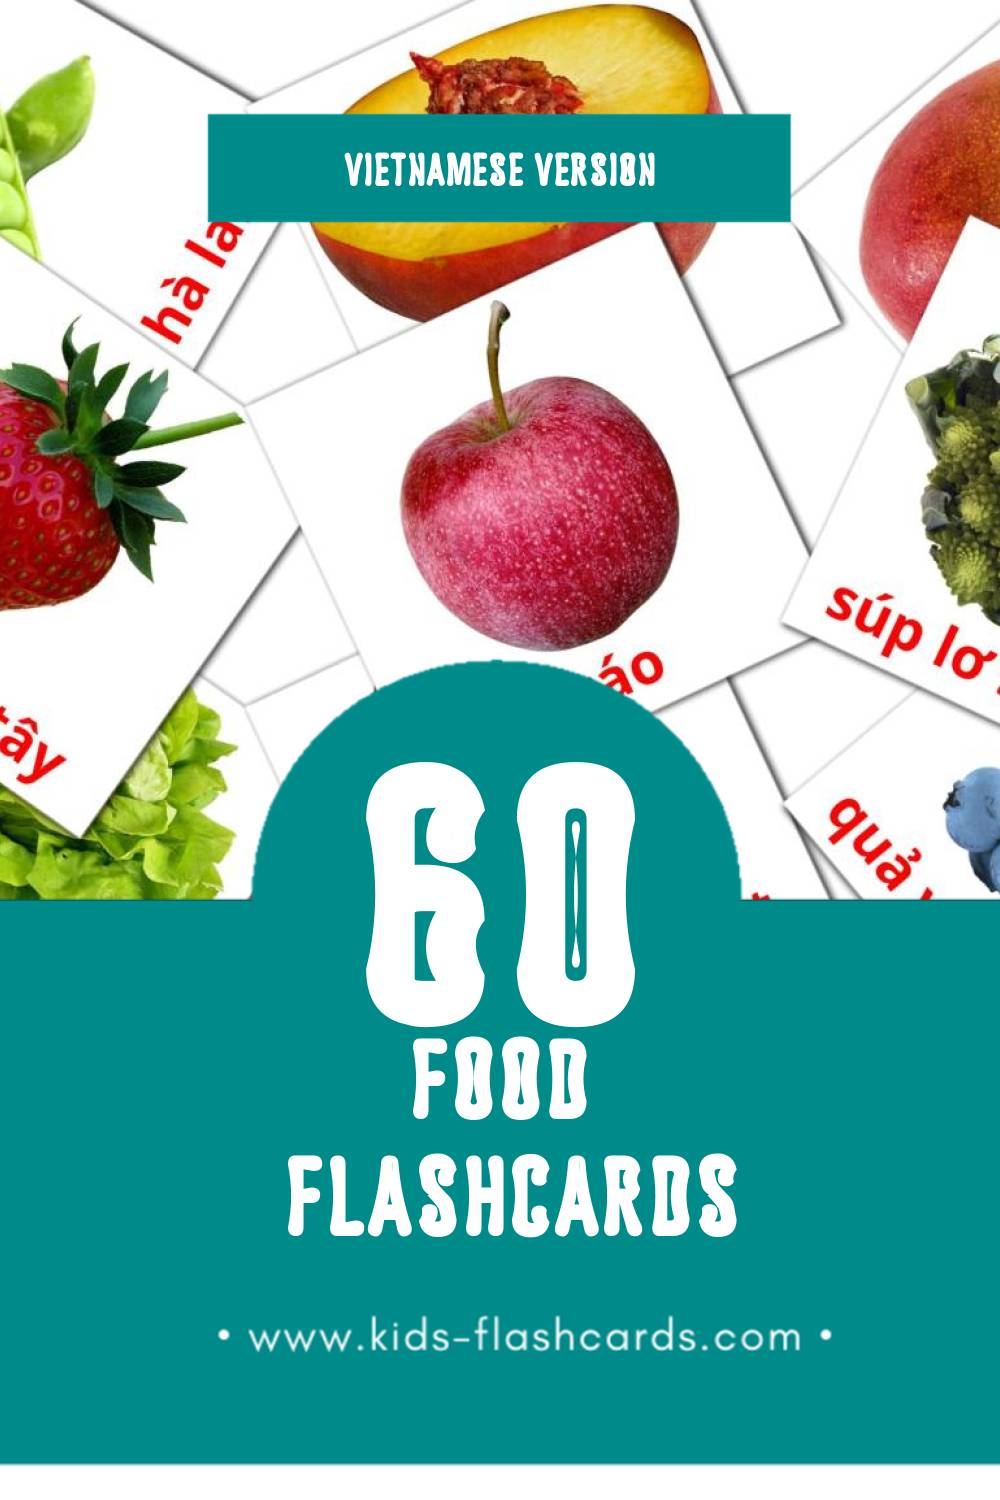 Visual Trái cây Flashcards for Toddlers (60 cards in Vietnamese)